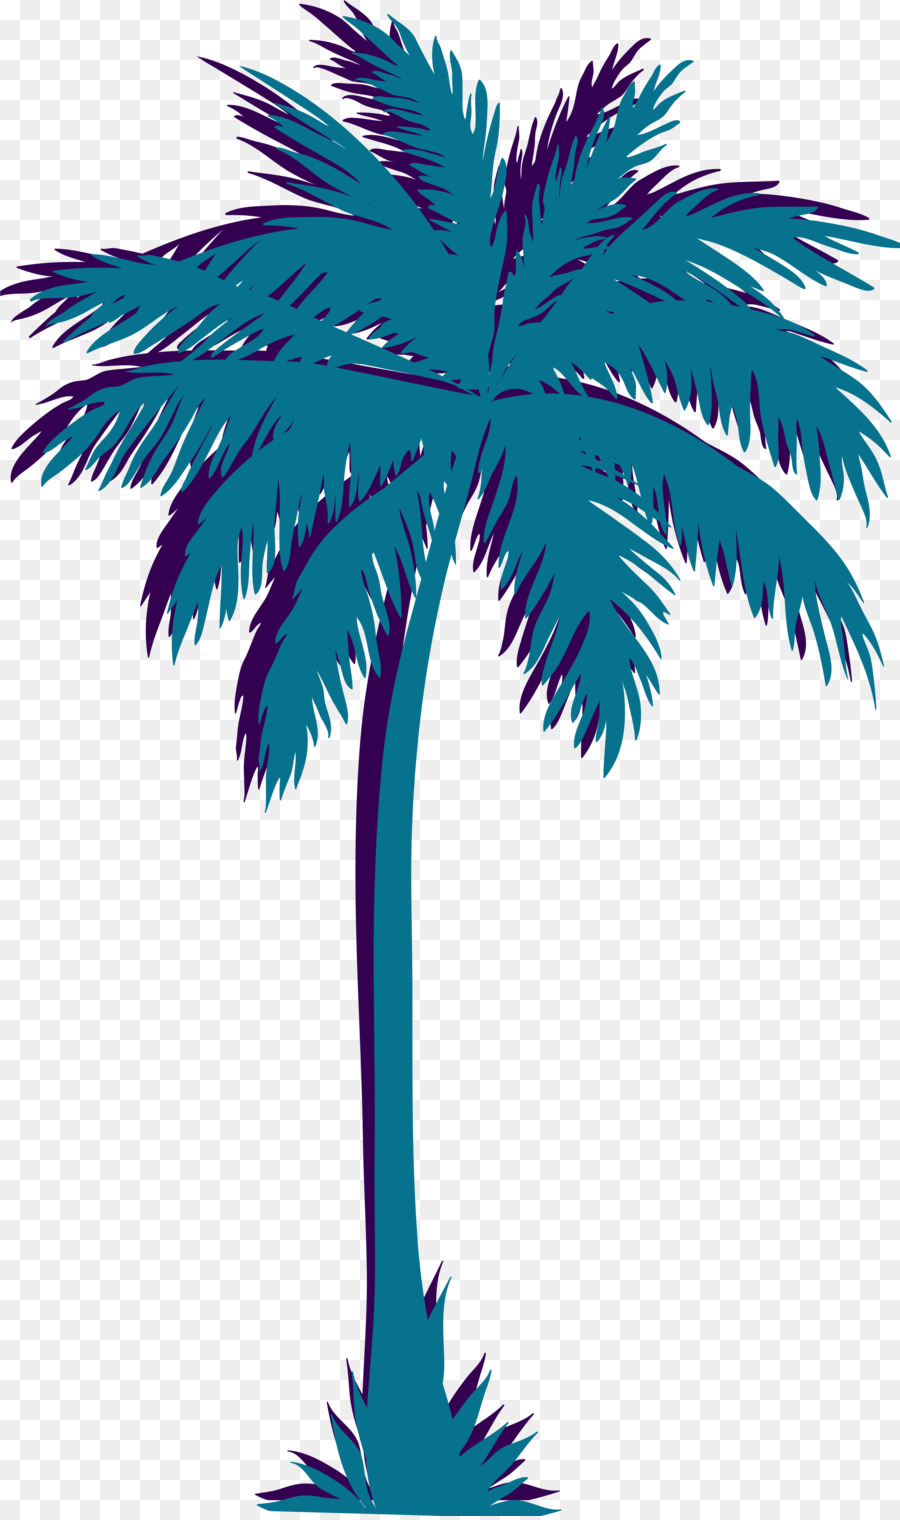 Portable Network Graphics Palm trees Vaporwave Clip art Vector graphics - spring break clipart png download png download - 4739*7982 - Free Transparent Palm Trees png Download.